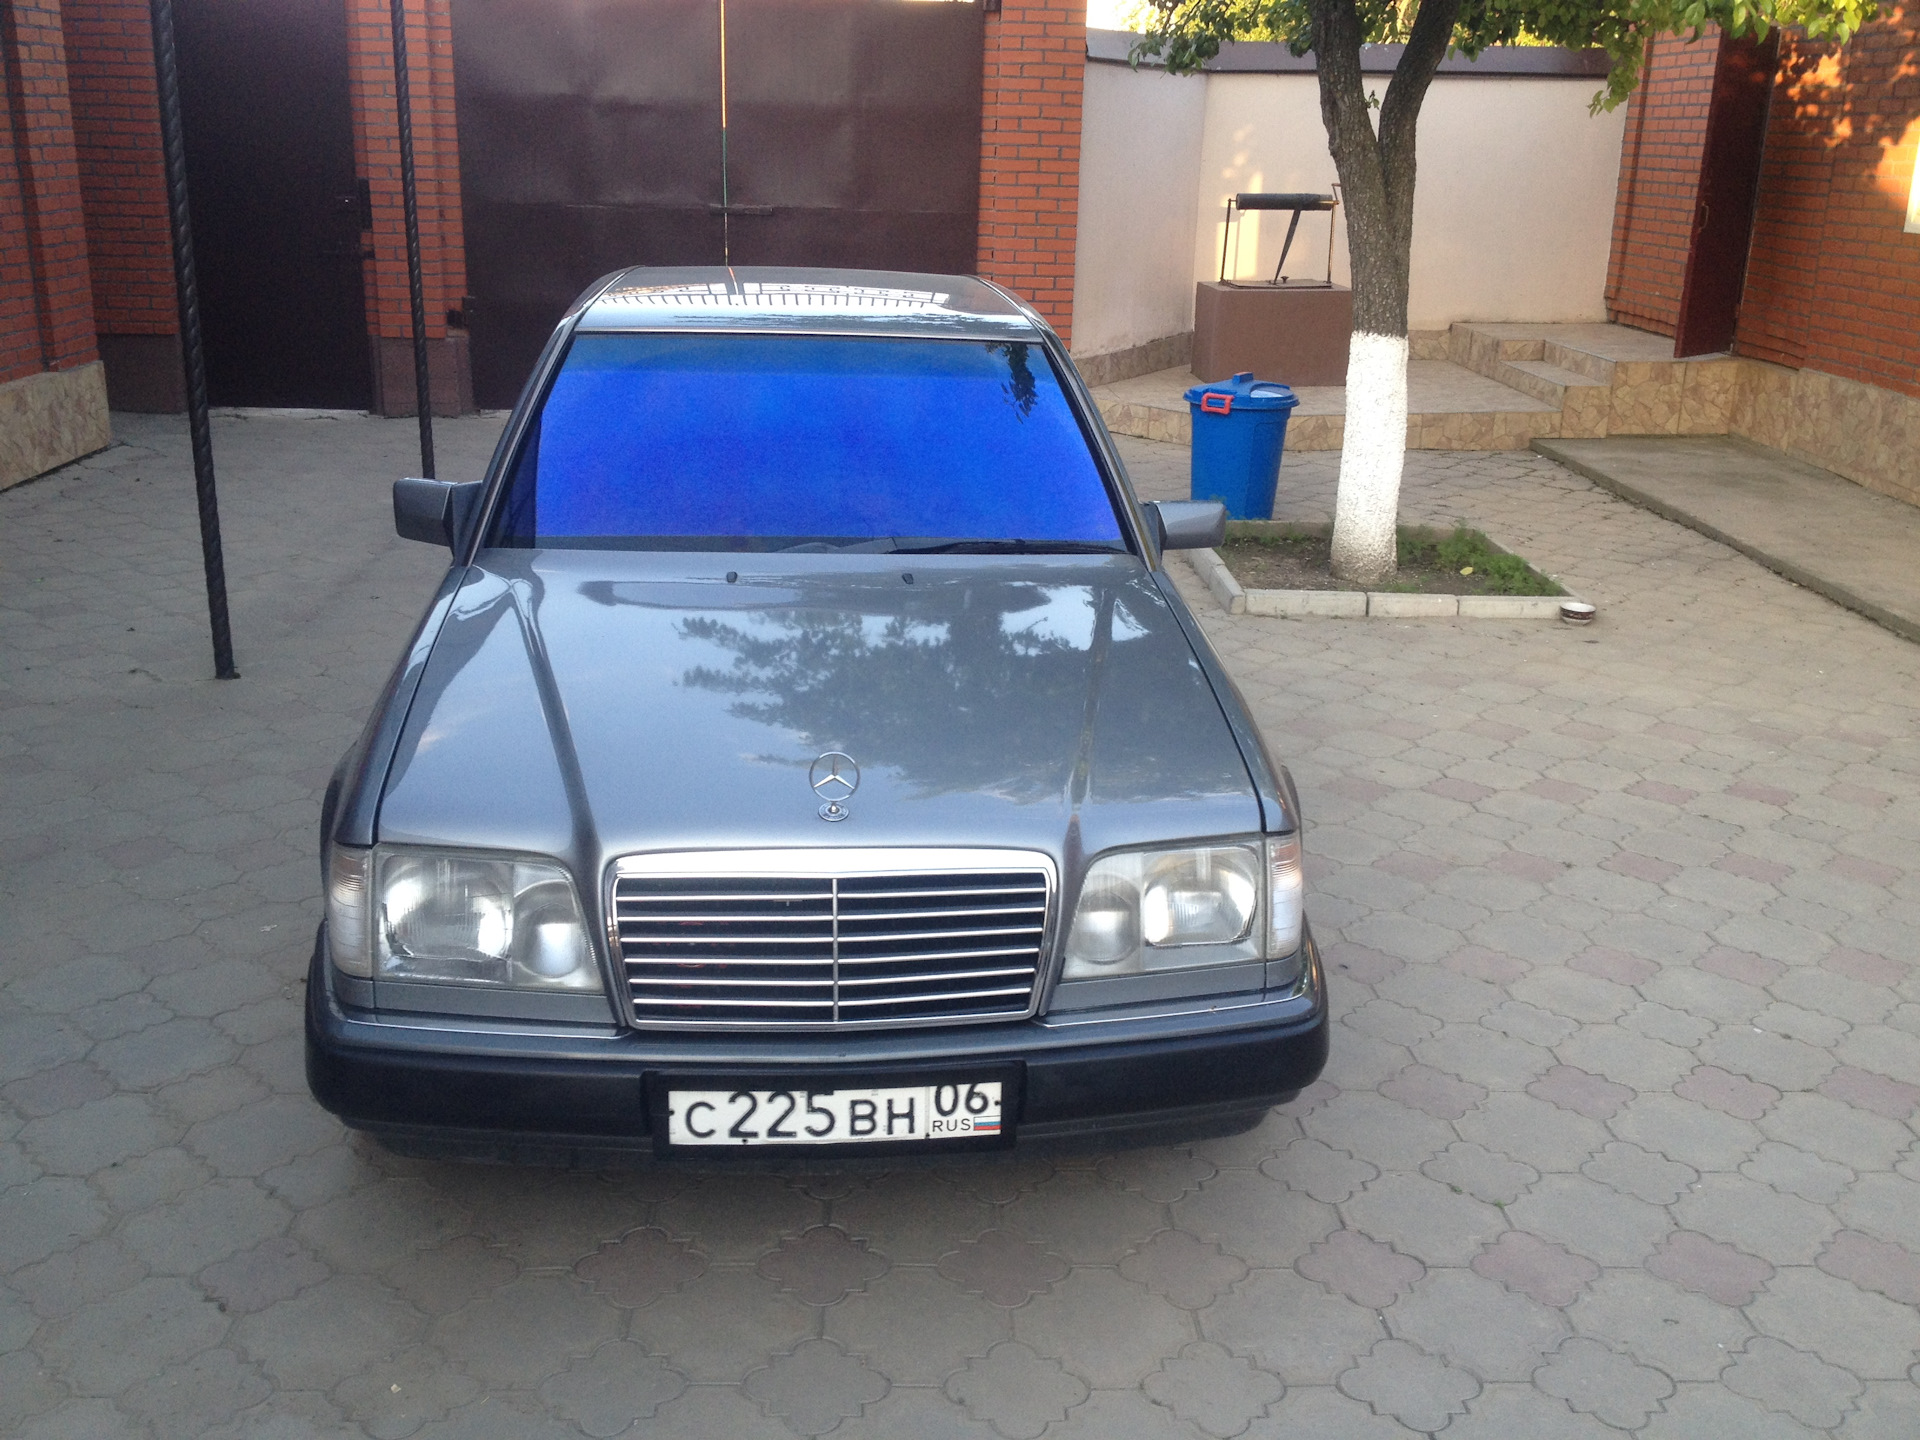 Mercedes 1991. Мерседес 1991. Мерседес 1991 года. Мерседес 1991 года выпуска 320. Мерседес 1991 классика зад.